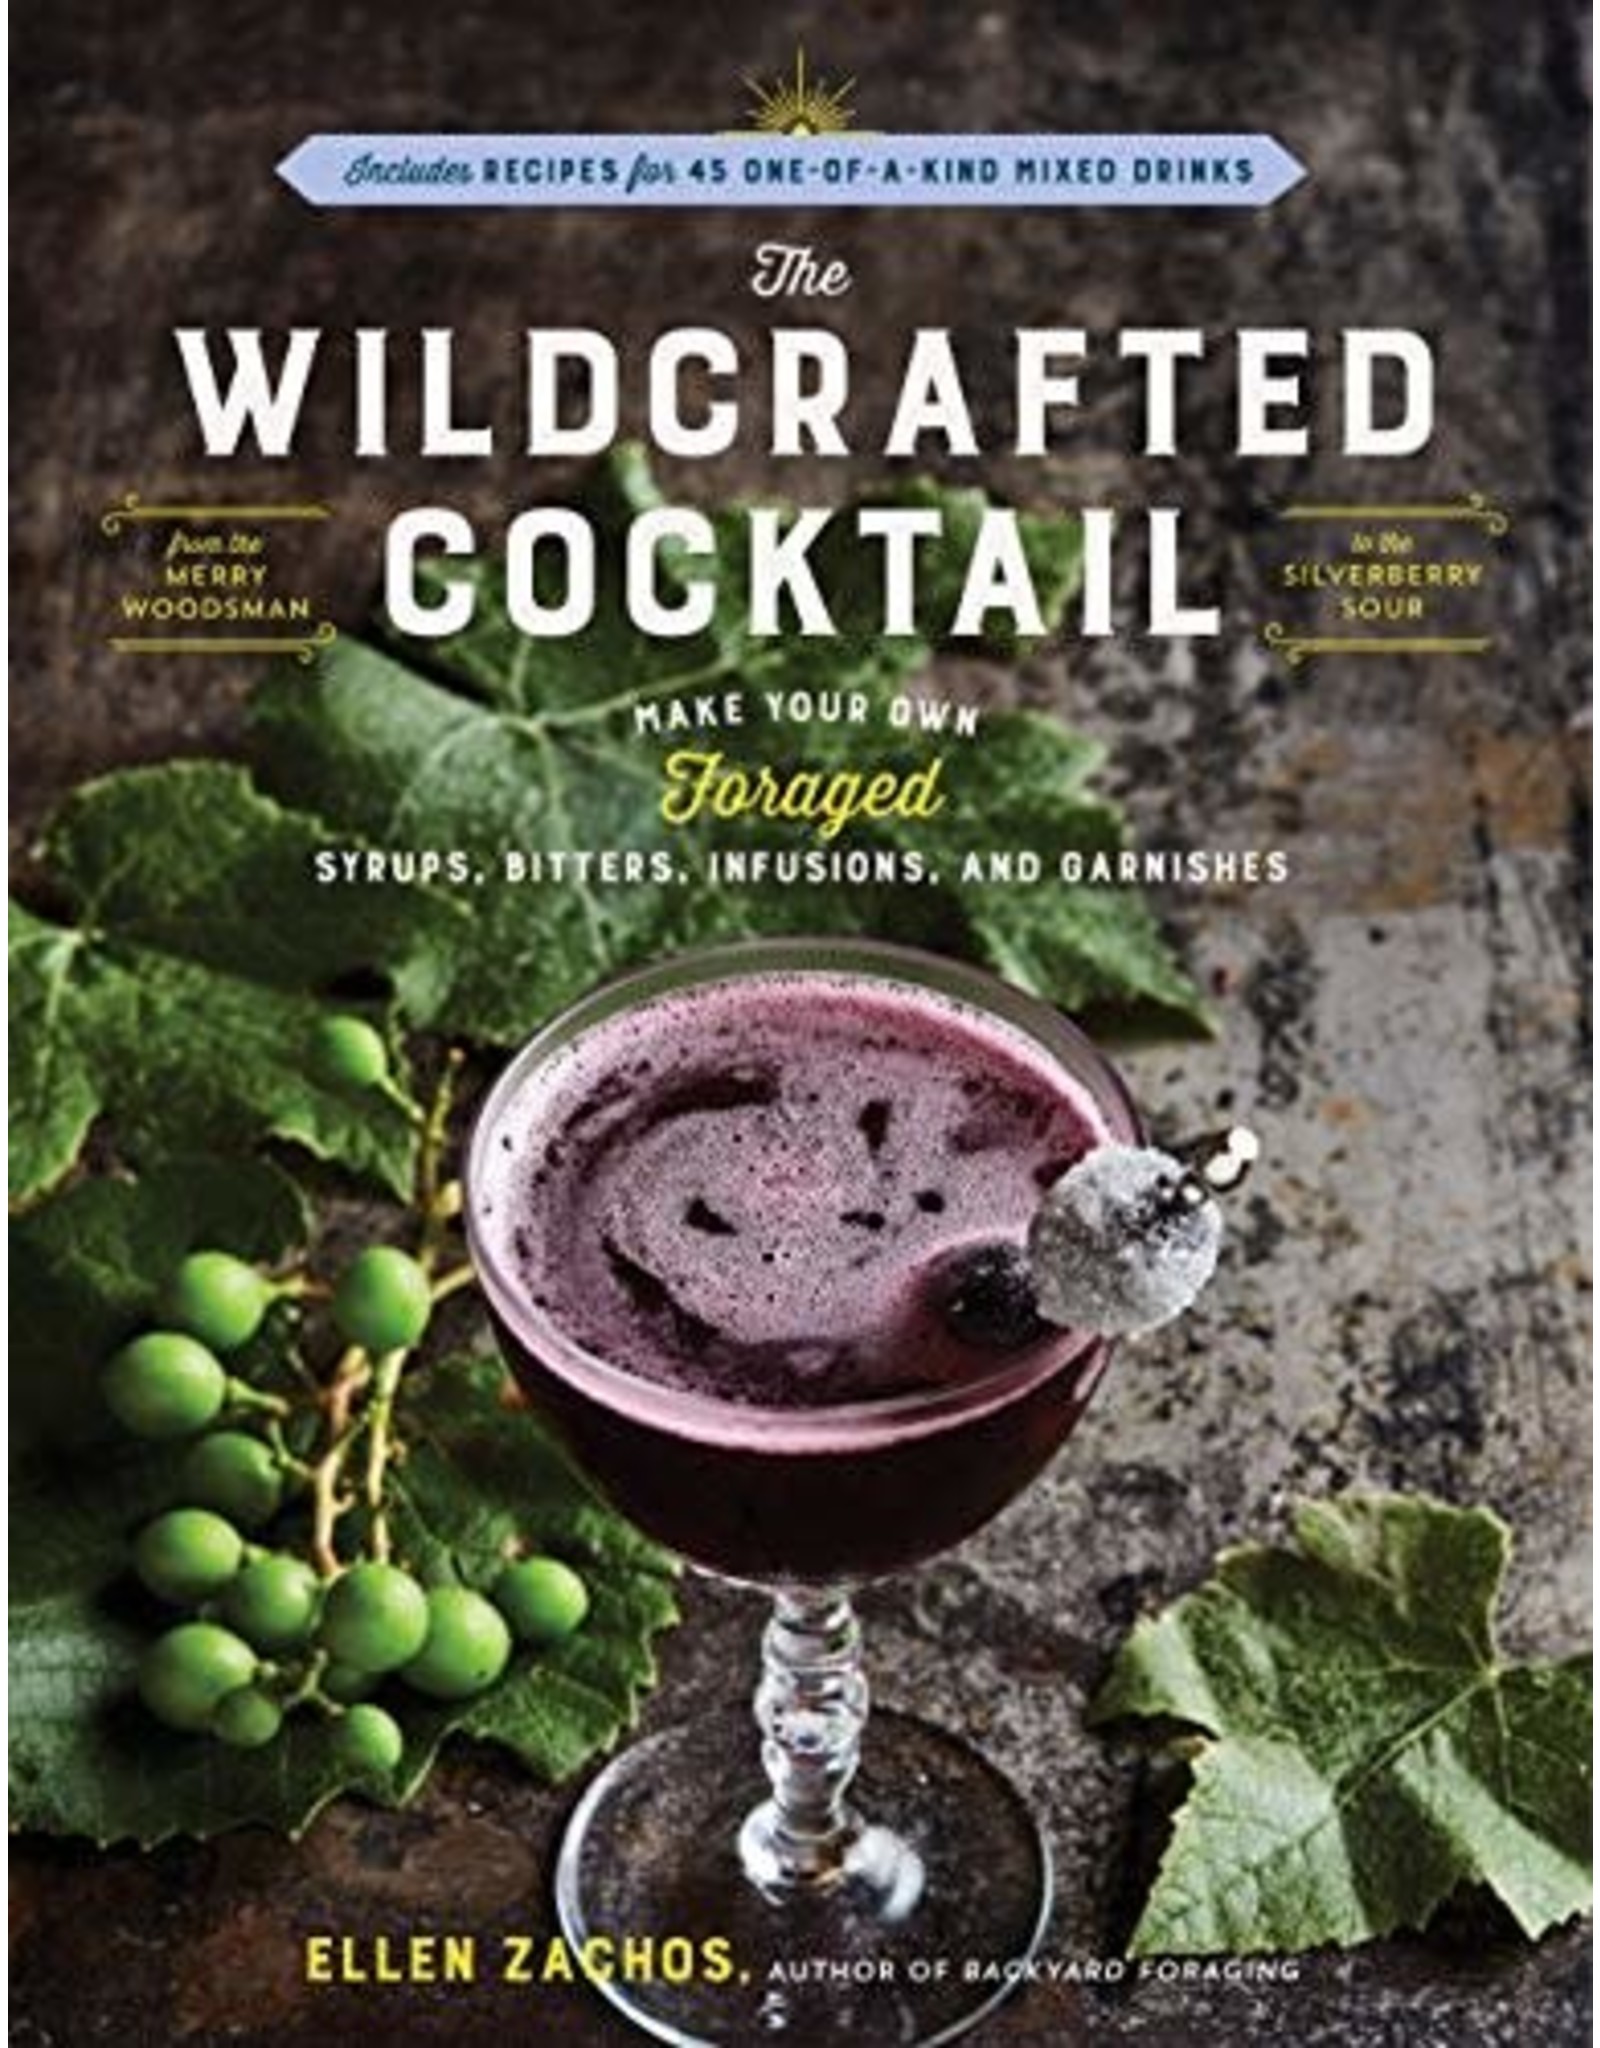 The Wildcrafted Cocktail  (book)